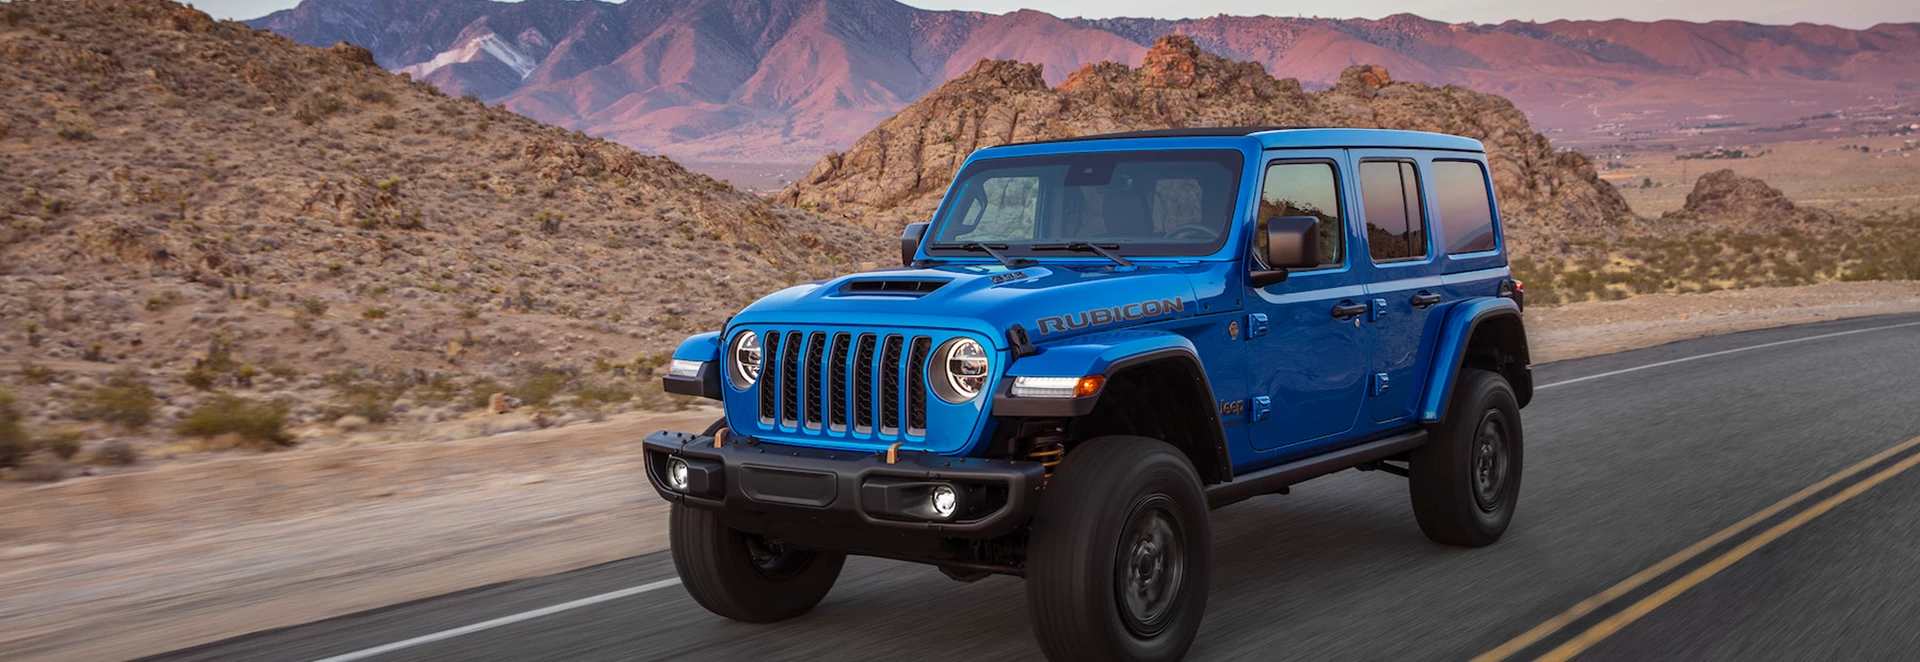 Meet the most powerful Jeep Wrangler ever: The V8 Rubicon 392 